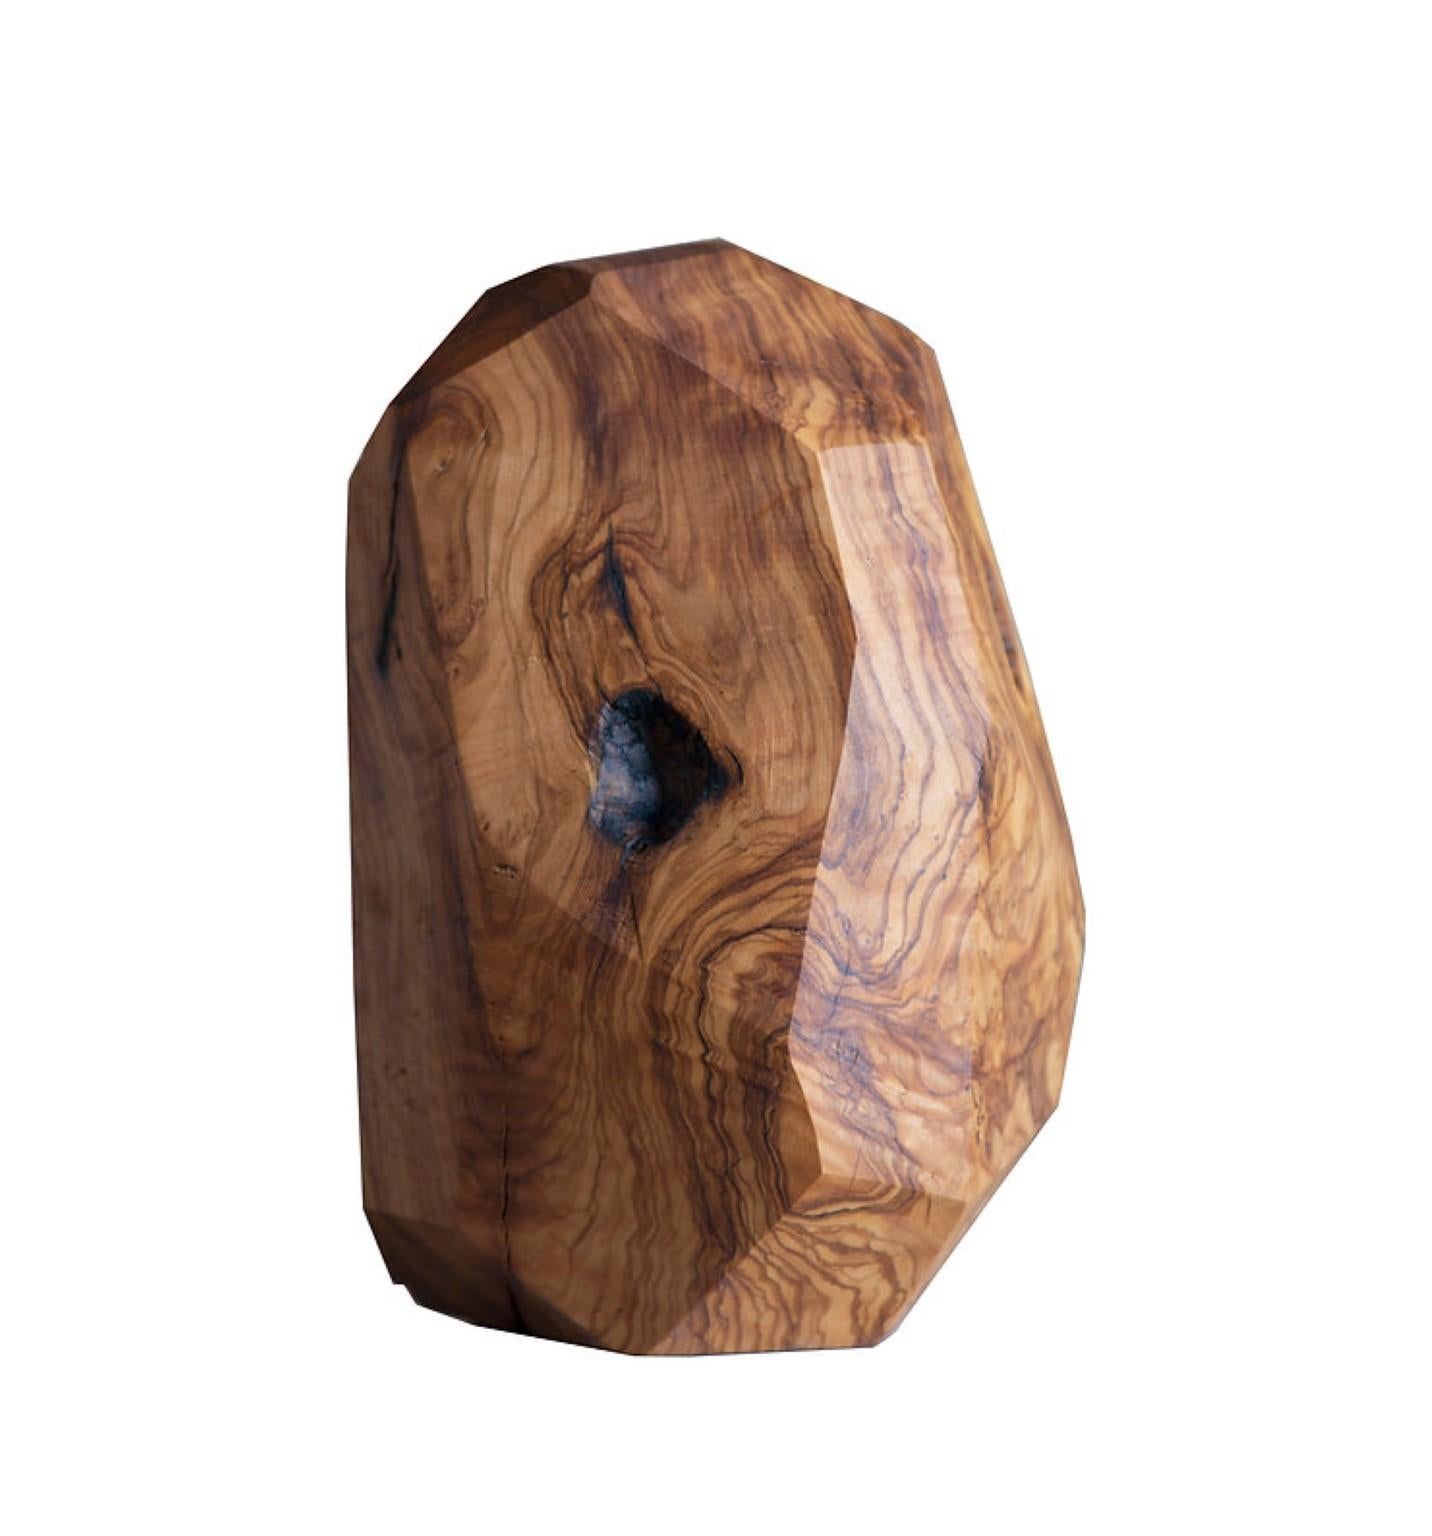 Medium Sculpture in olive wood by Rectangle Studio
Dimensions: 23 x 23 x 33 cm
Materials: Solid Olive Wood

It is collected from the roots and branches of different olive trees in the Aegean geography, shaped and finalized by handwork by the